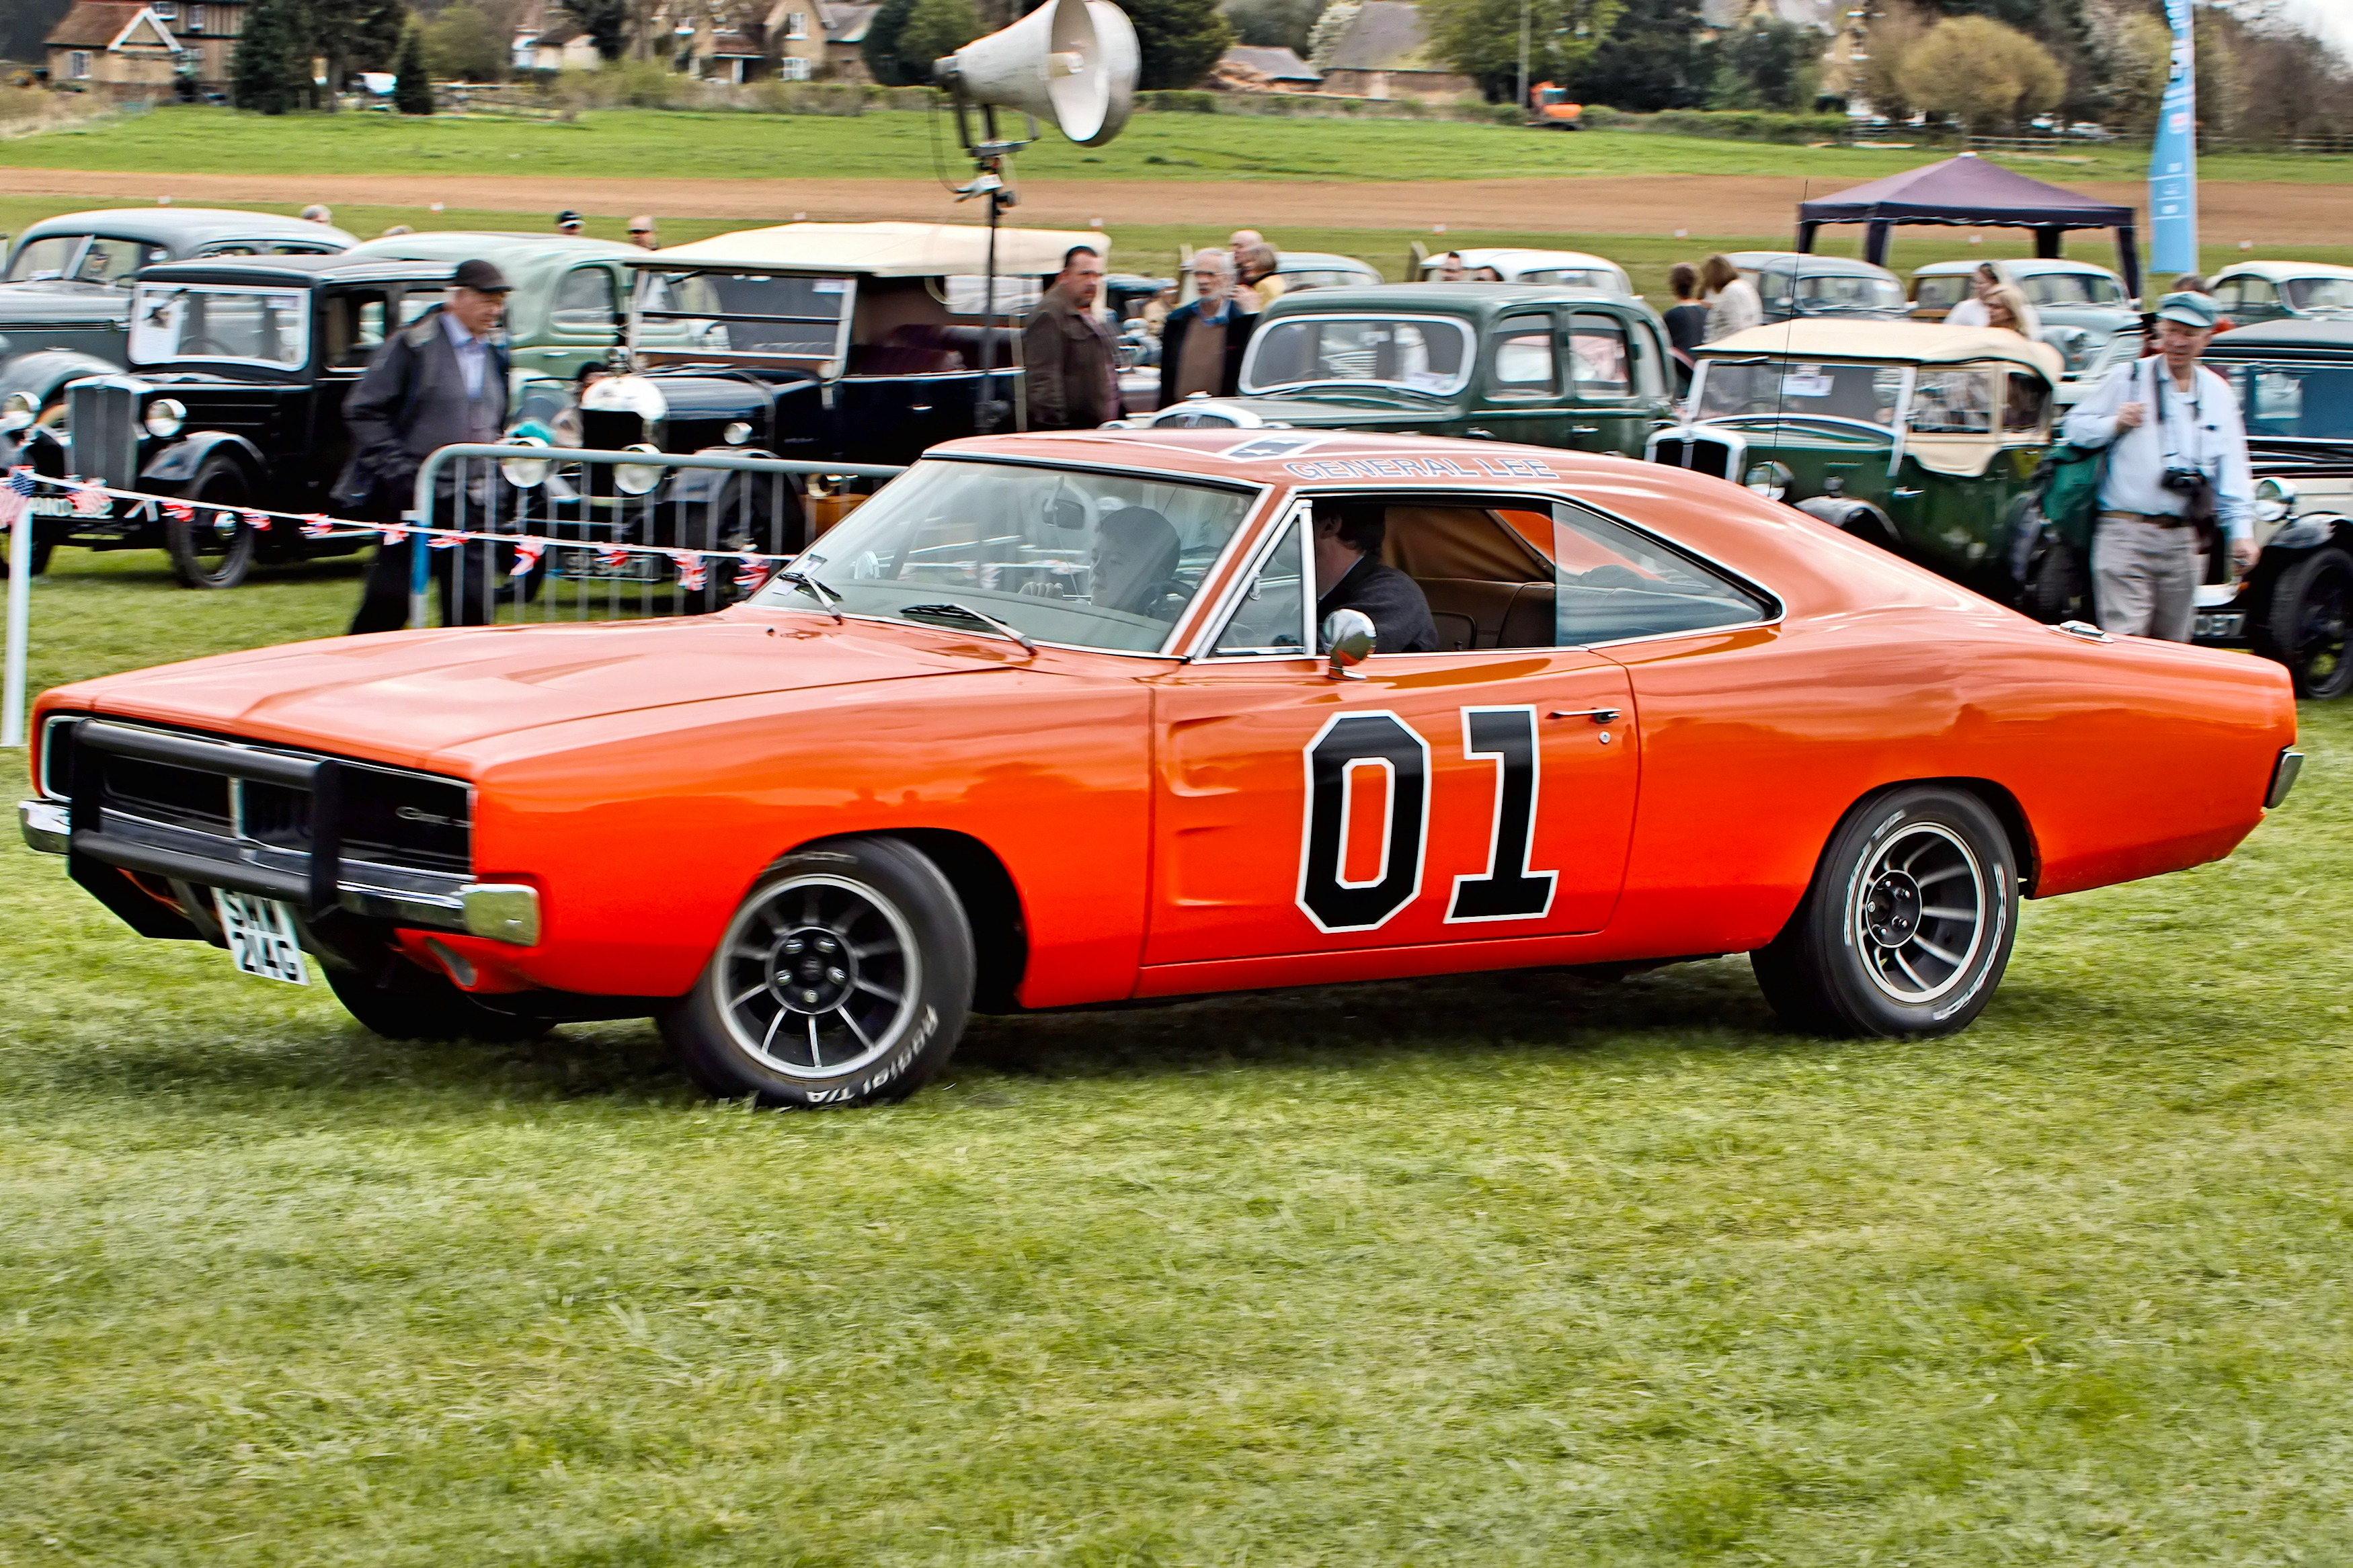 File:Dodge Charger - Shuttleworth Classic Car Show 2017 (33432865180).jpg -  Wikimedia Commons